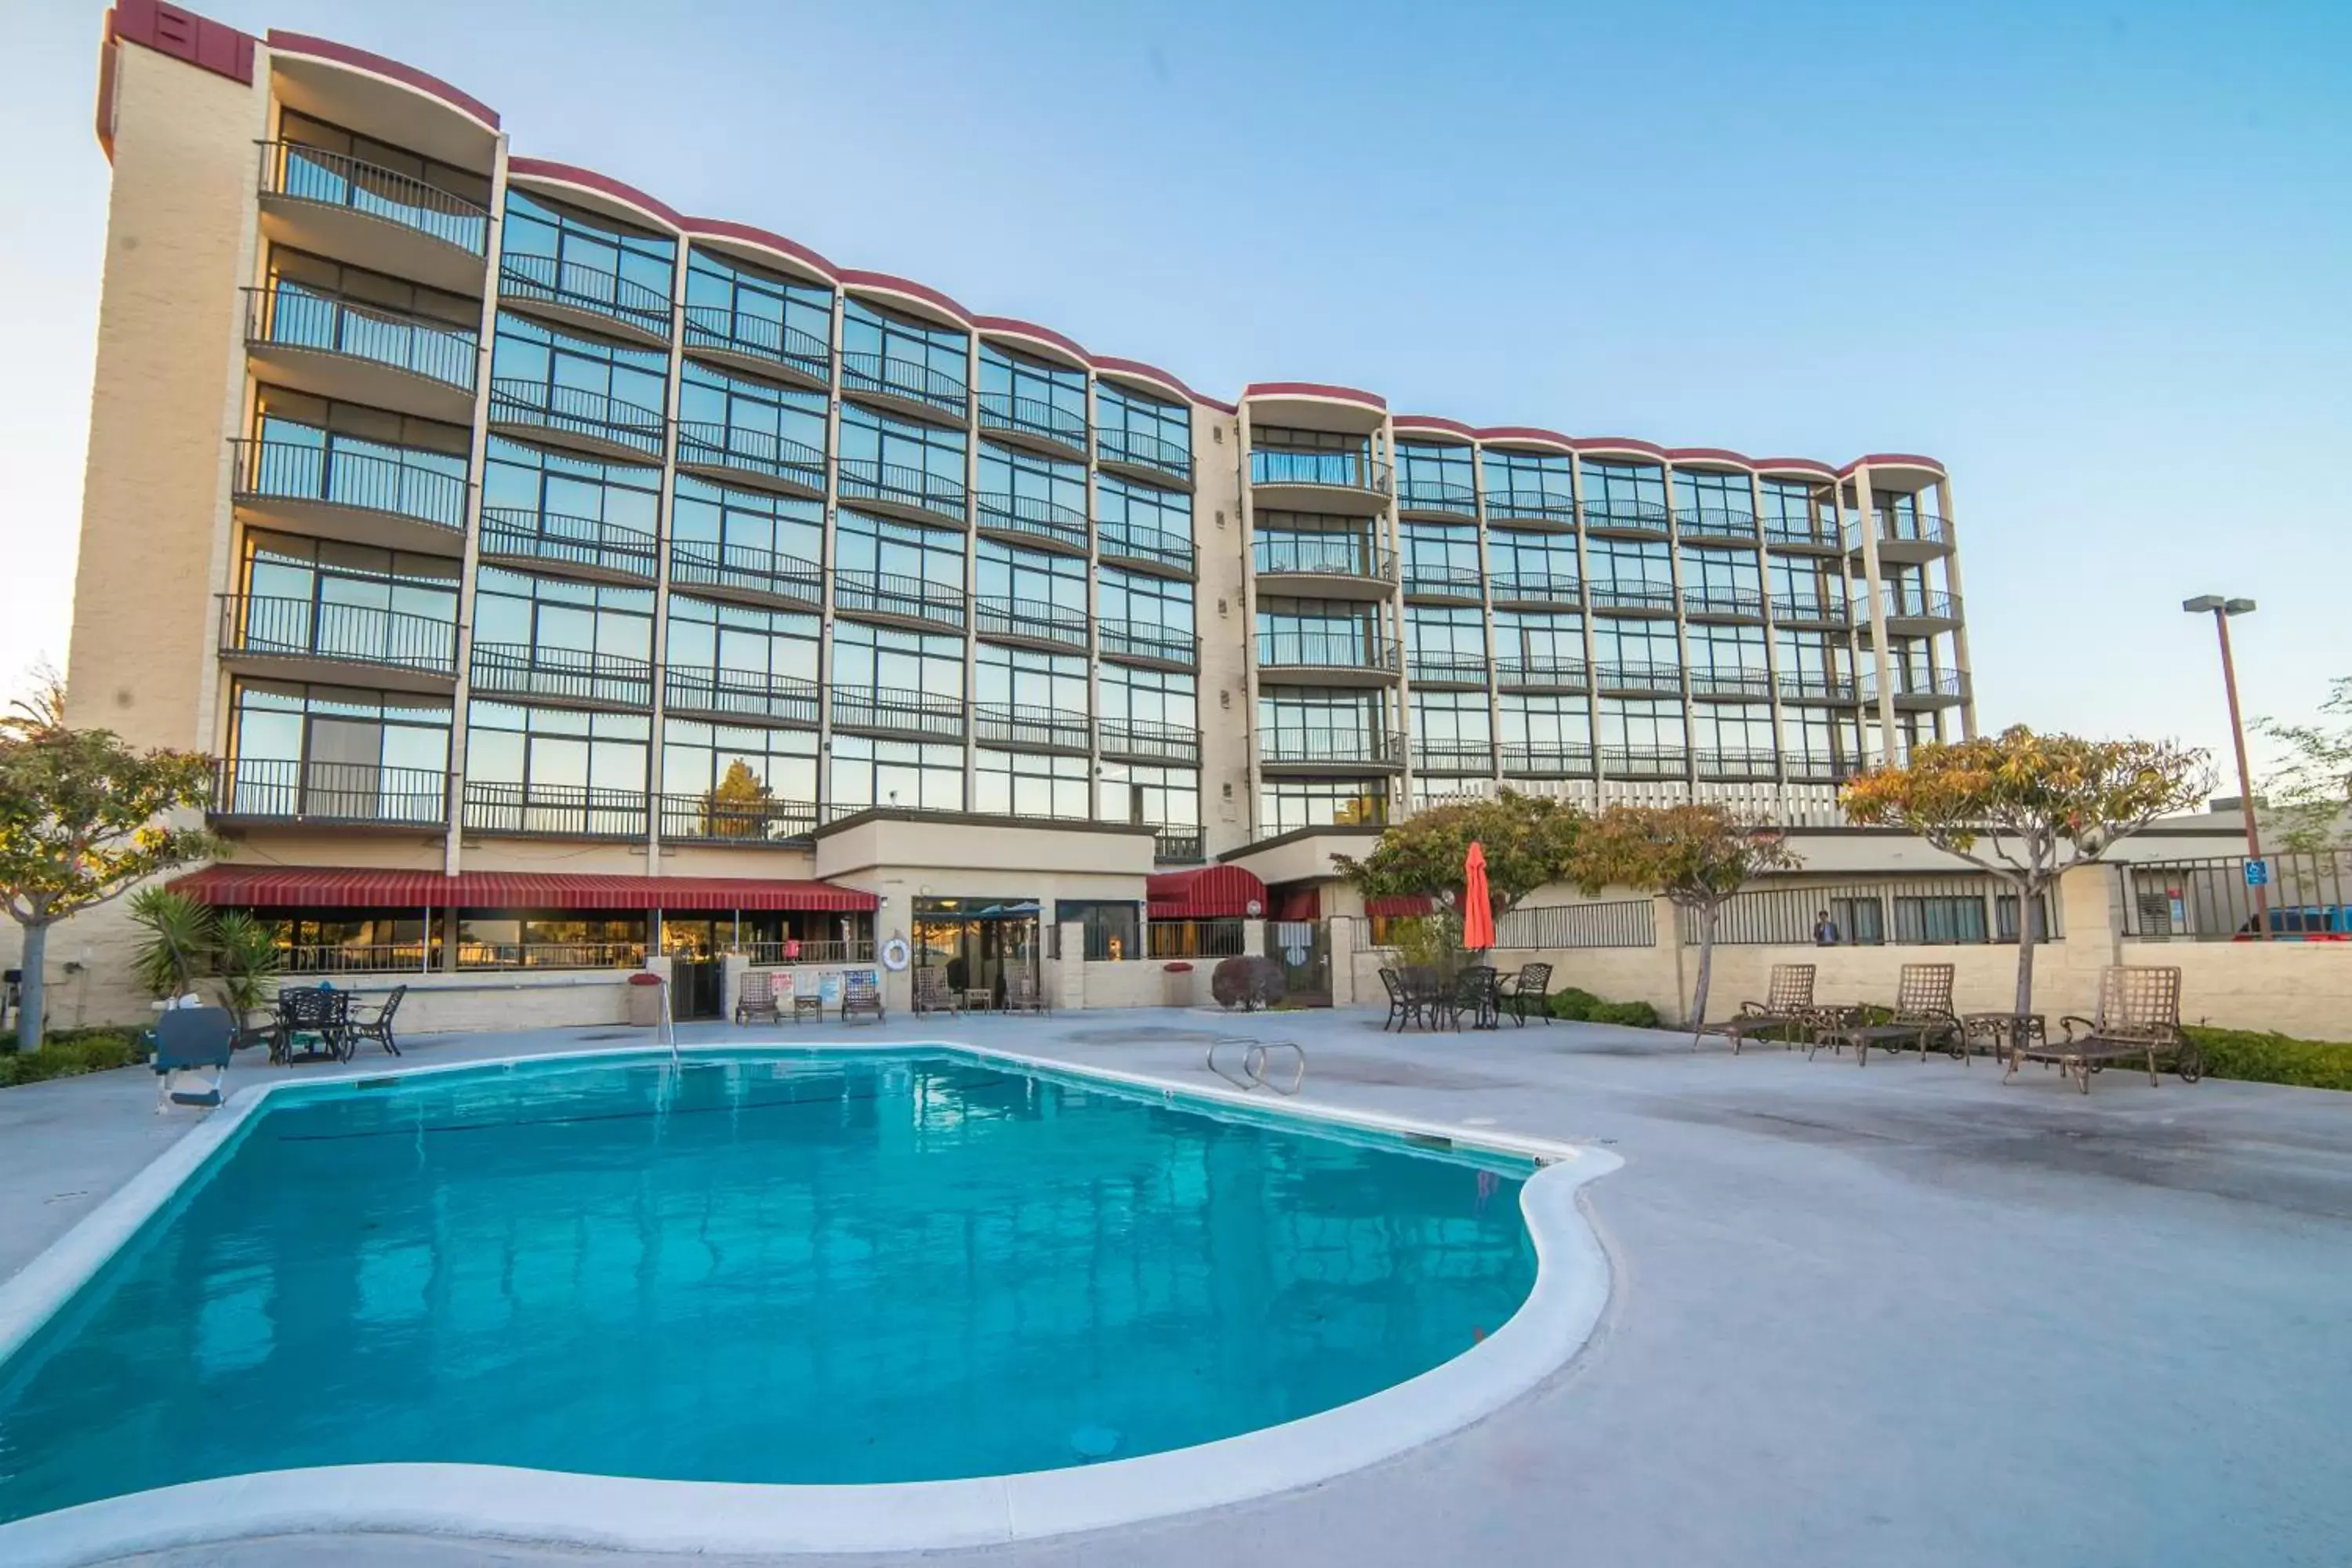 Swimming pool, Property Building in Oakland Airport Executive Hotel